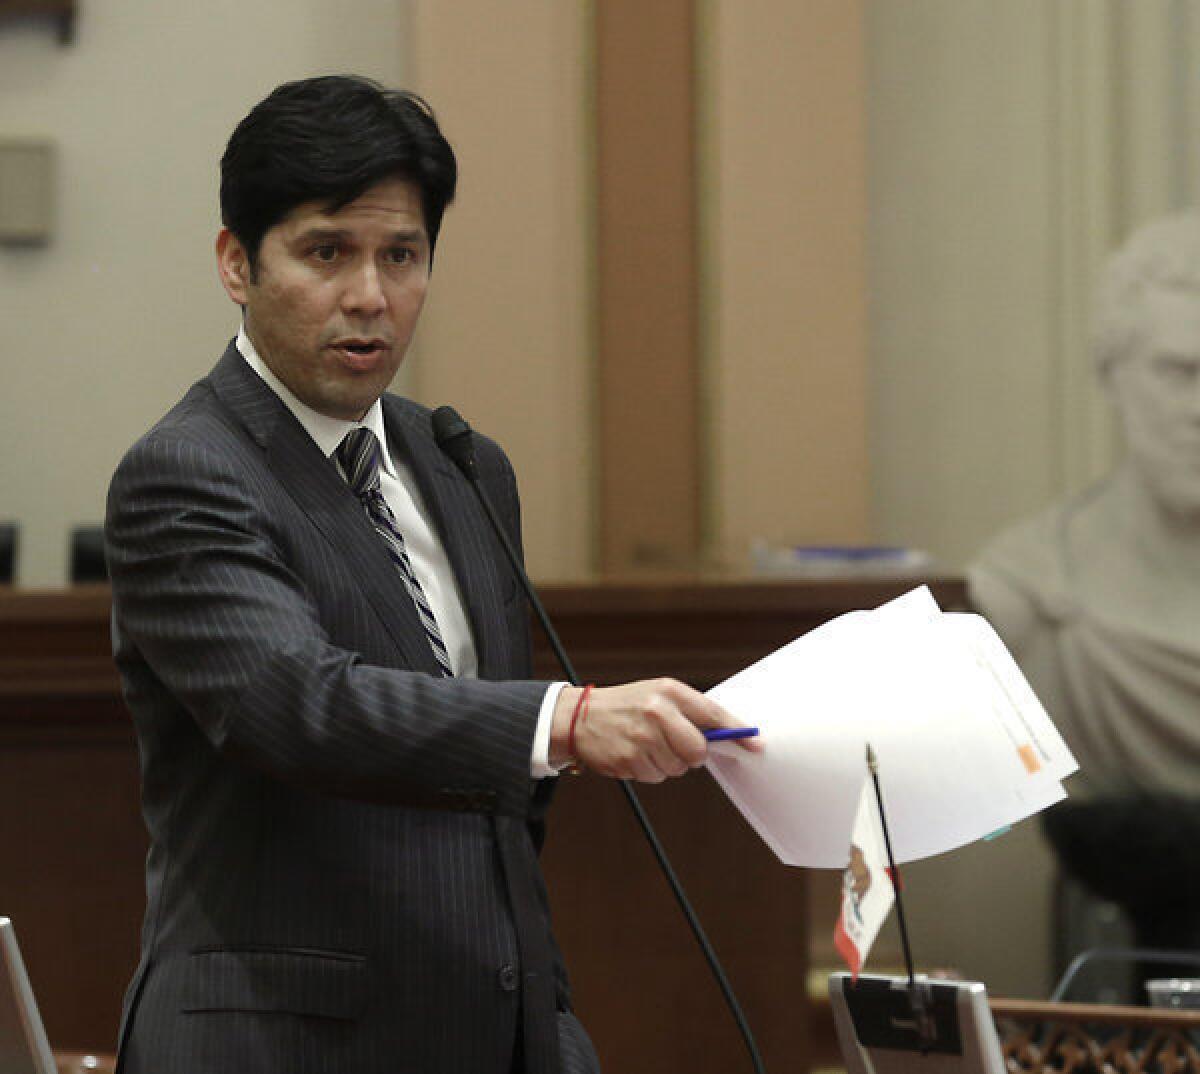 State Sen. Kevin de Leon, (D-Los Angeles), speaking during a September session, has denied playing a role in a contribution given to a nonprofit tied to Sen. Ronald S. Calderon (D-Montebello).